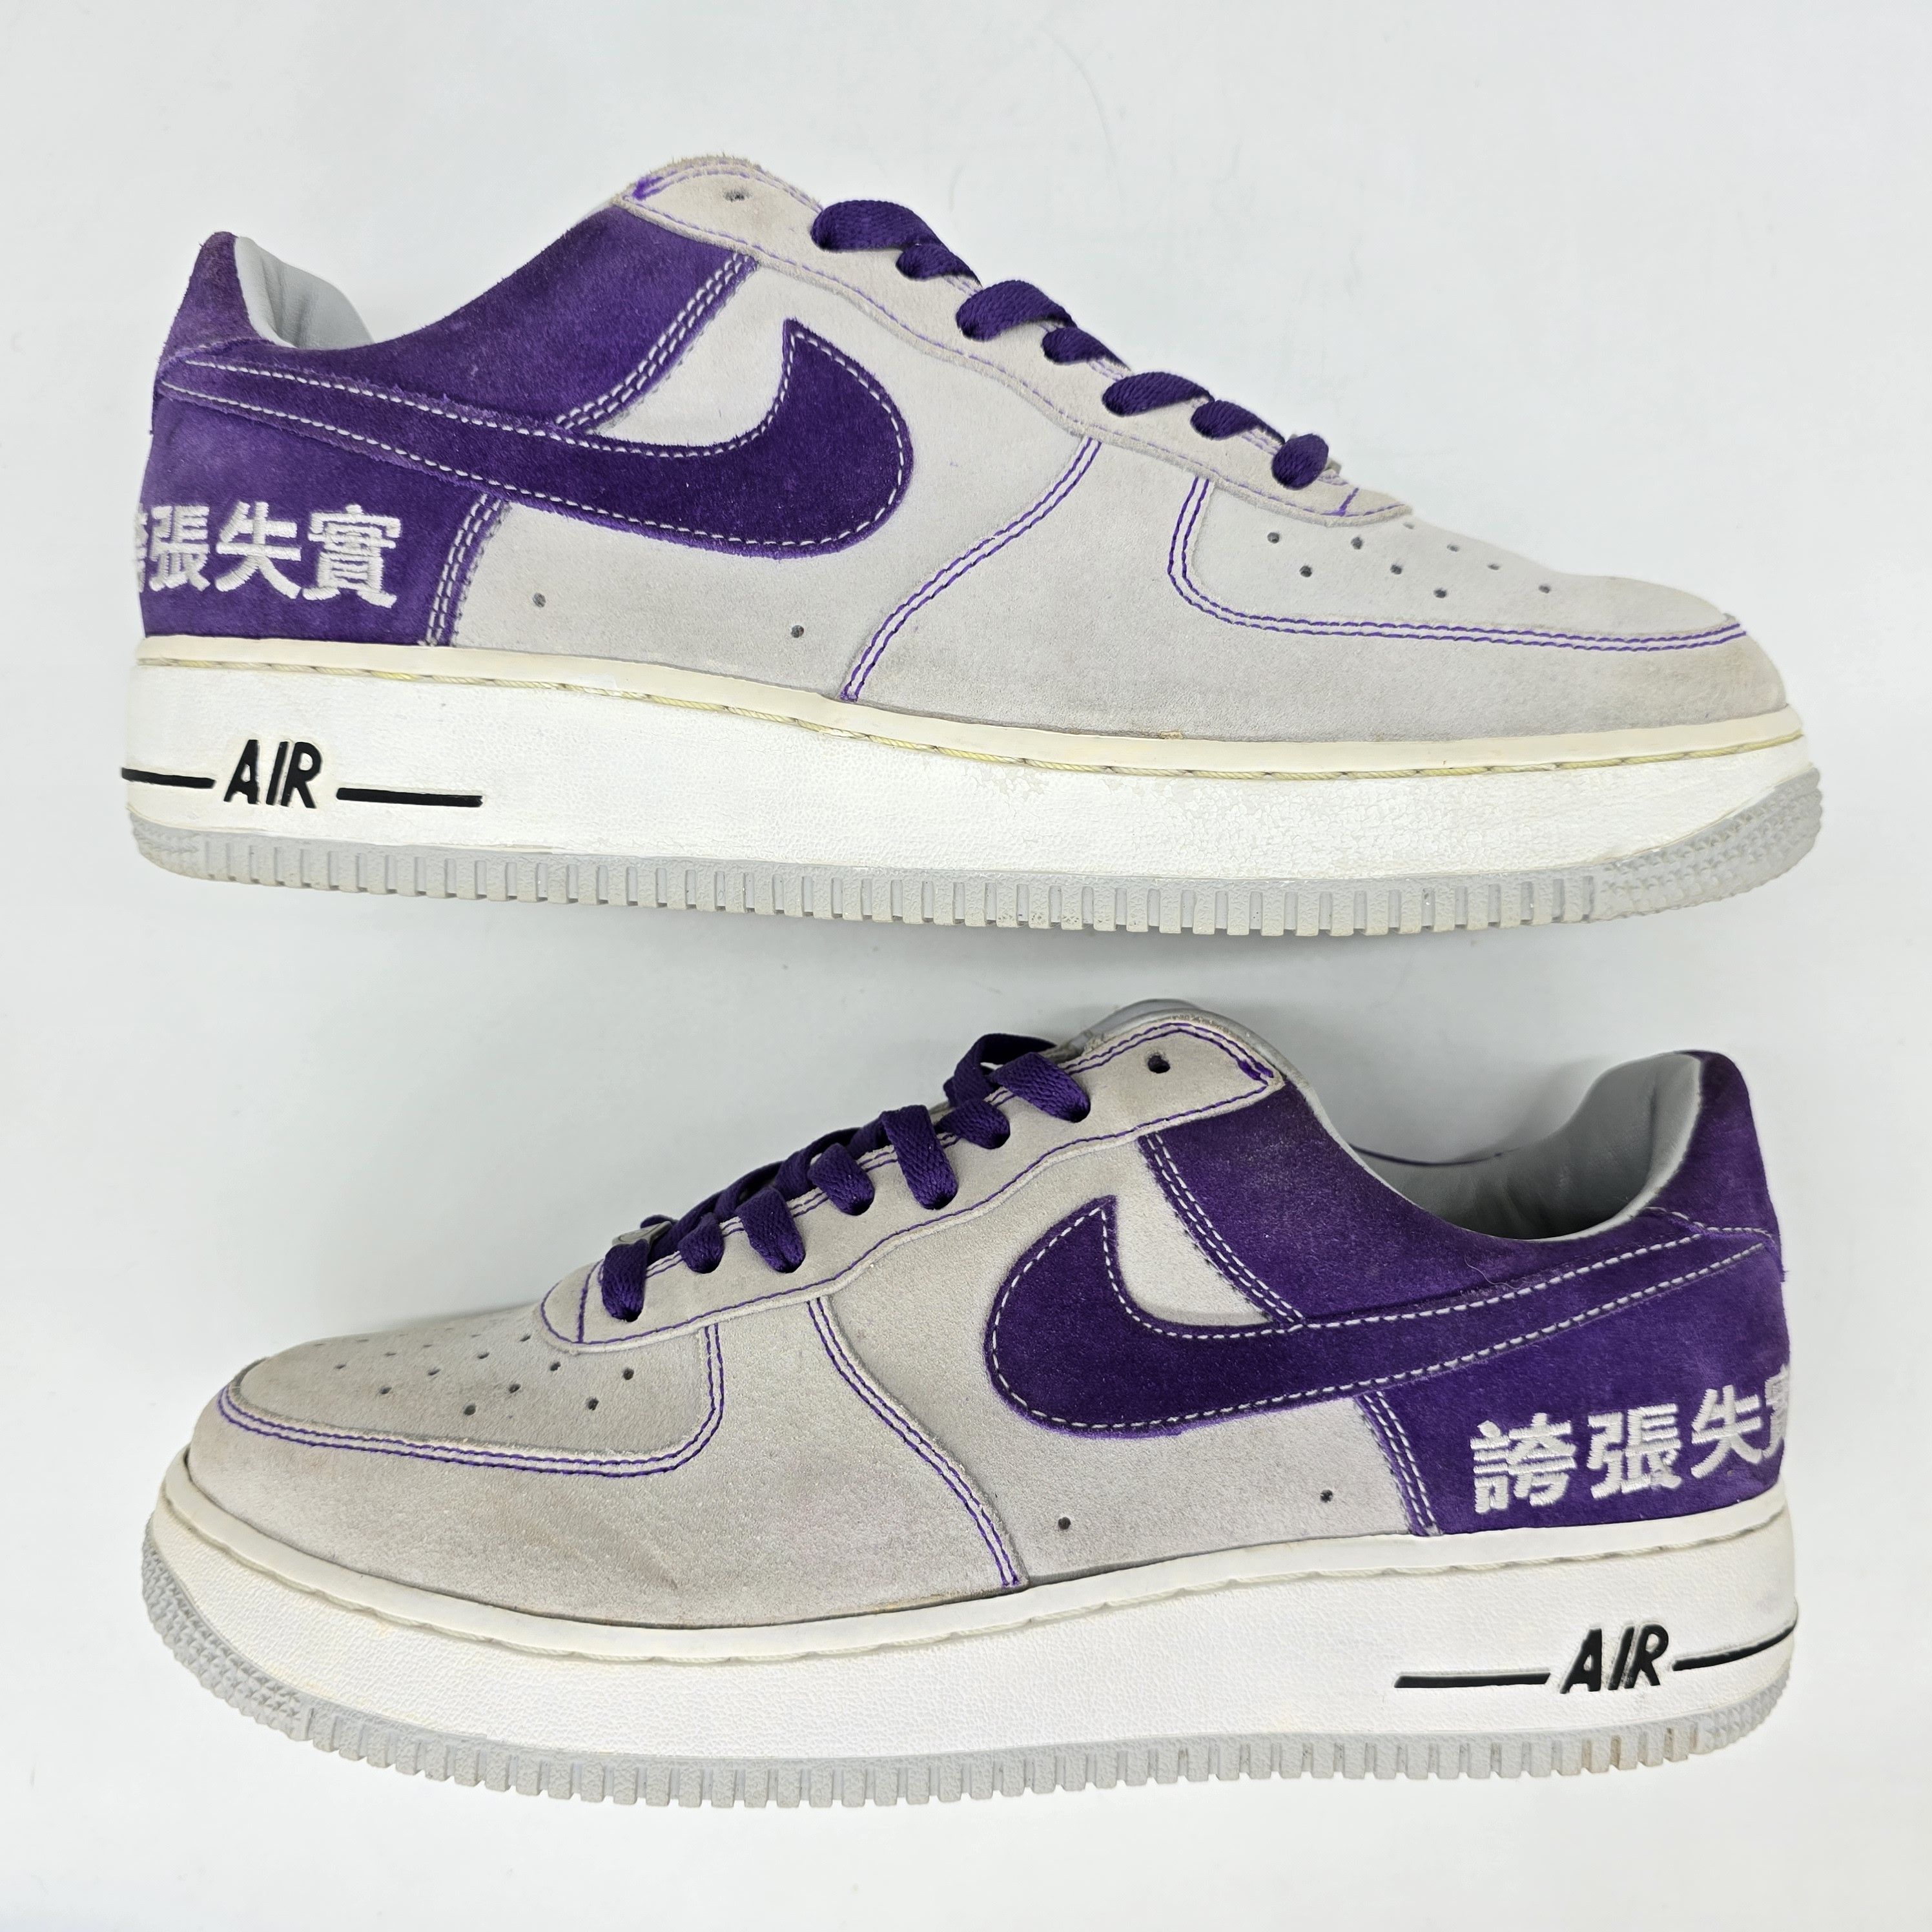 Nike - 2005 Airforce 1 Chamber of Fear "Hype" - 6